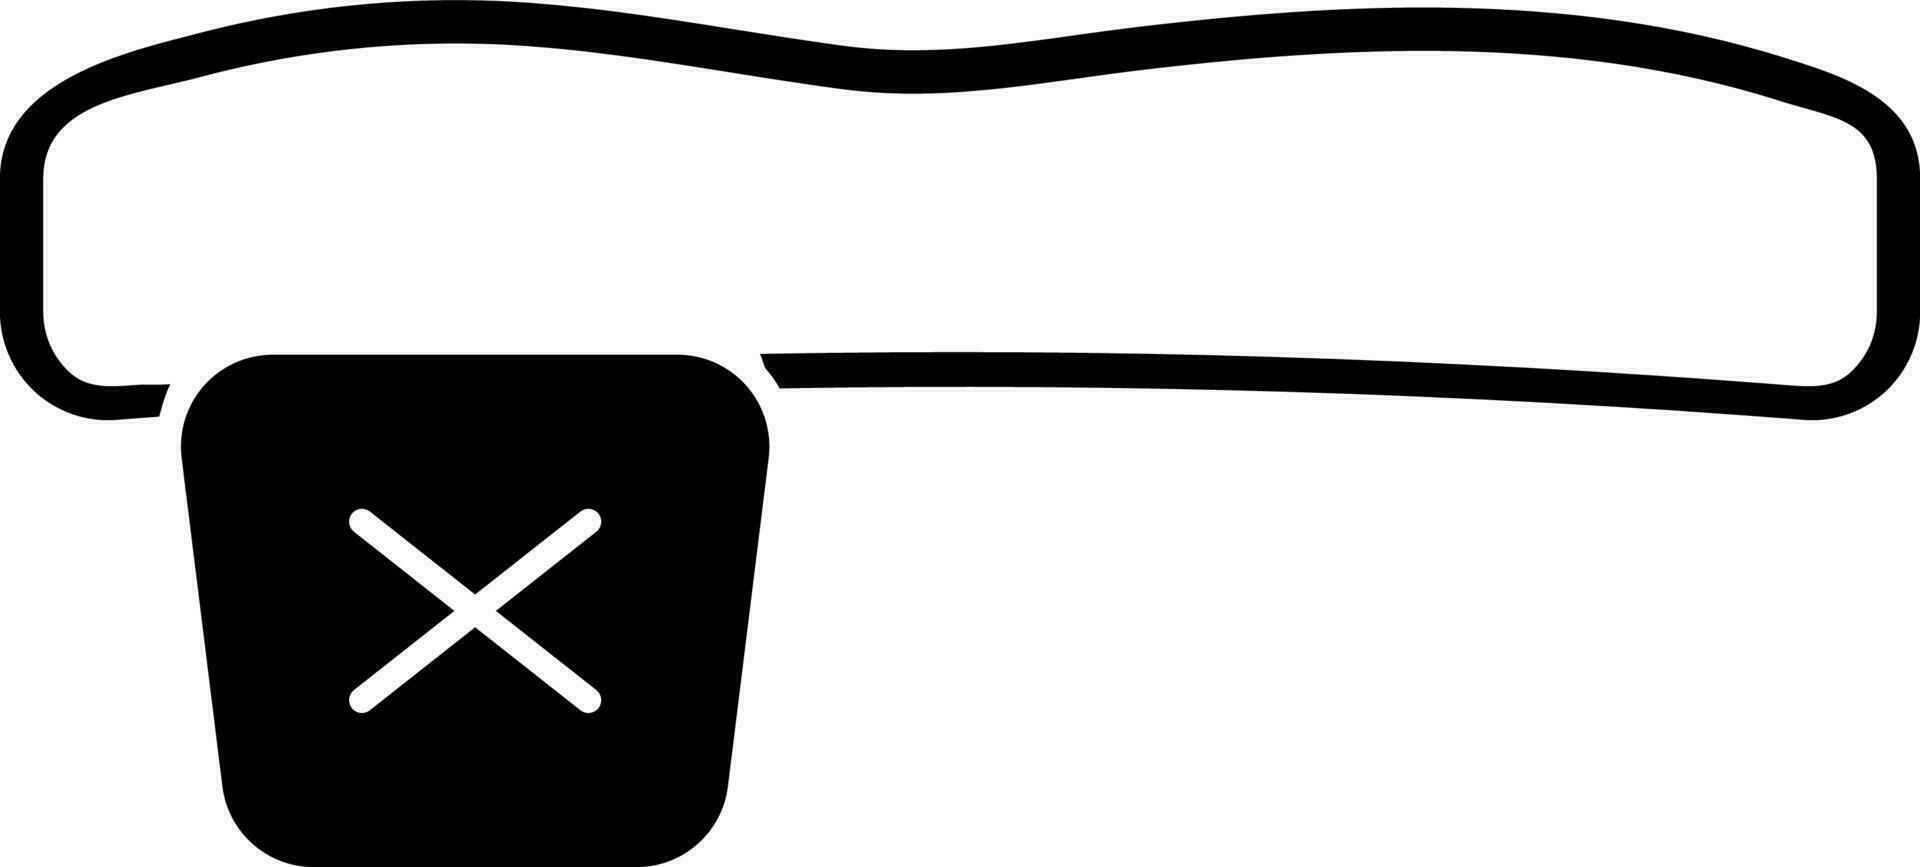 Glyph icon or symbol of eye patch. vector